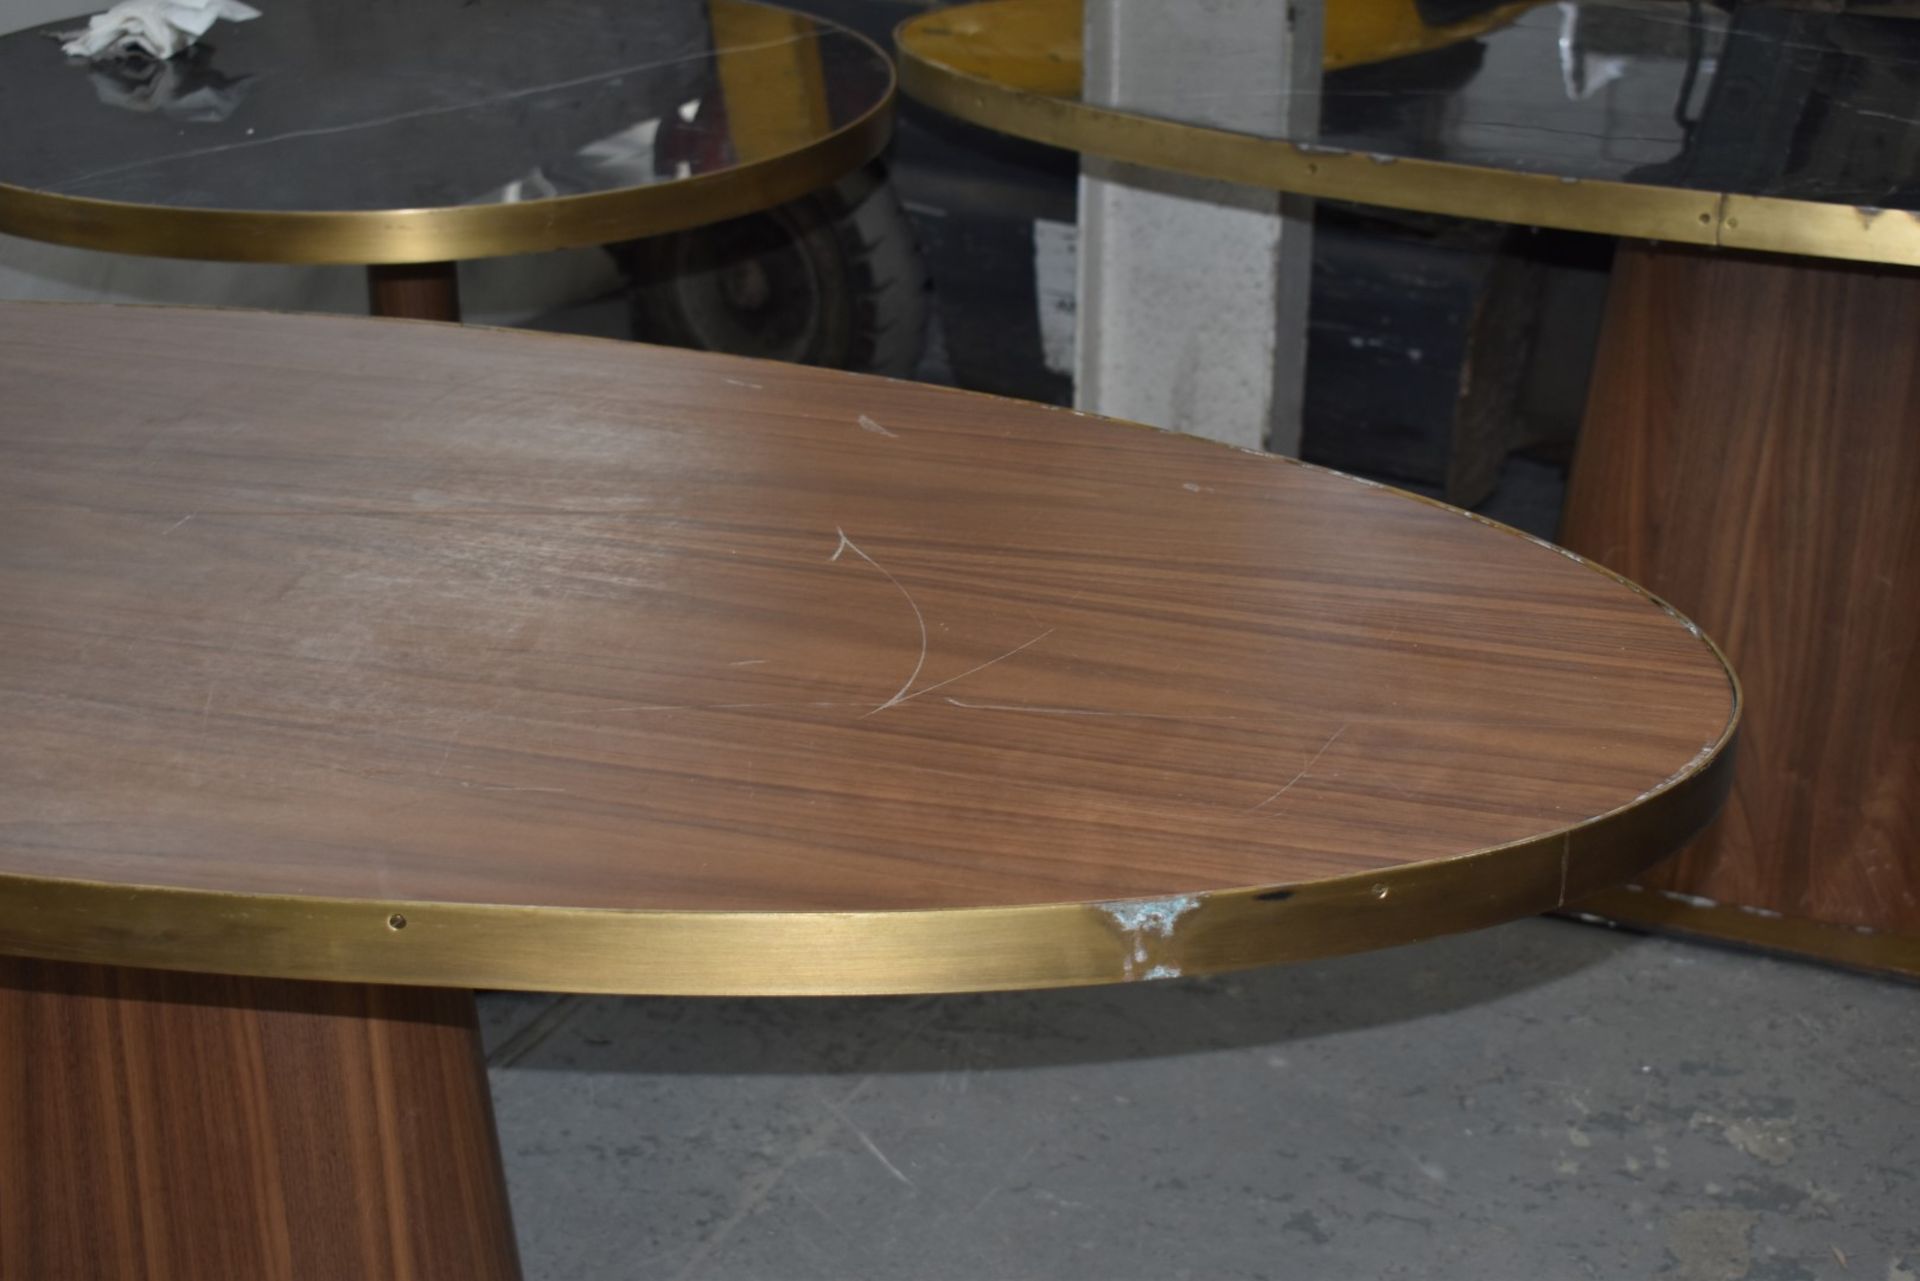 1 x Oval Banqueting Dining Table By AKP Design Athens - Walnut Top With Antique Brass Edging - Image 7 of 7